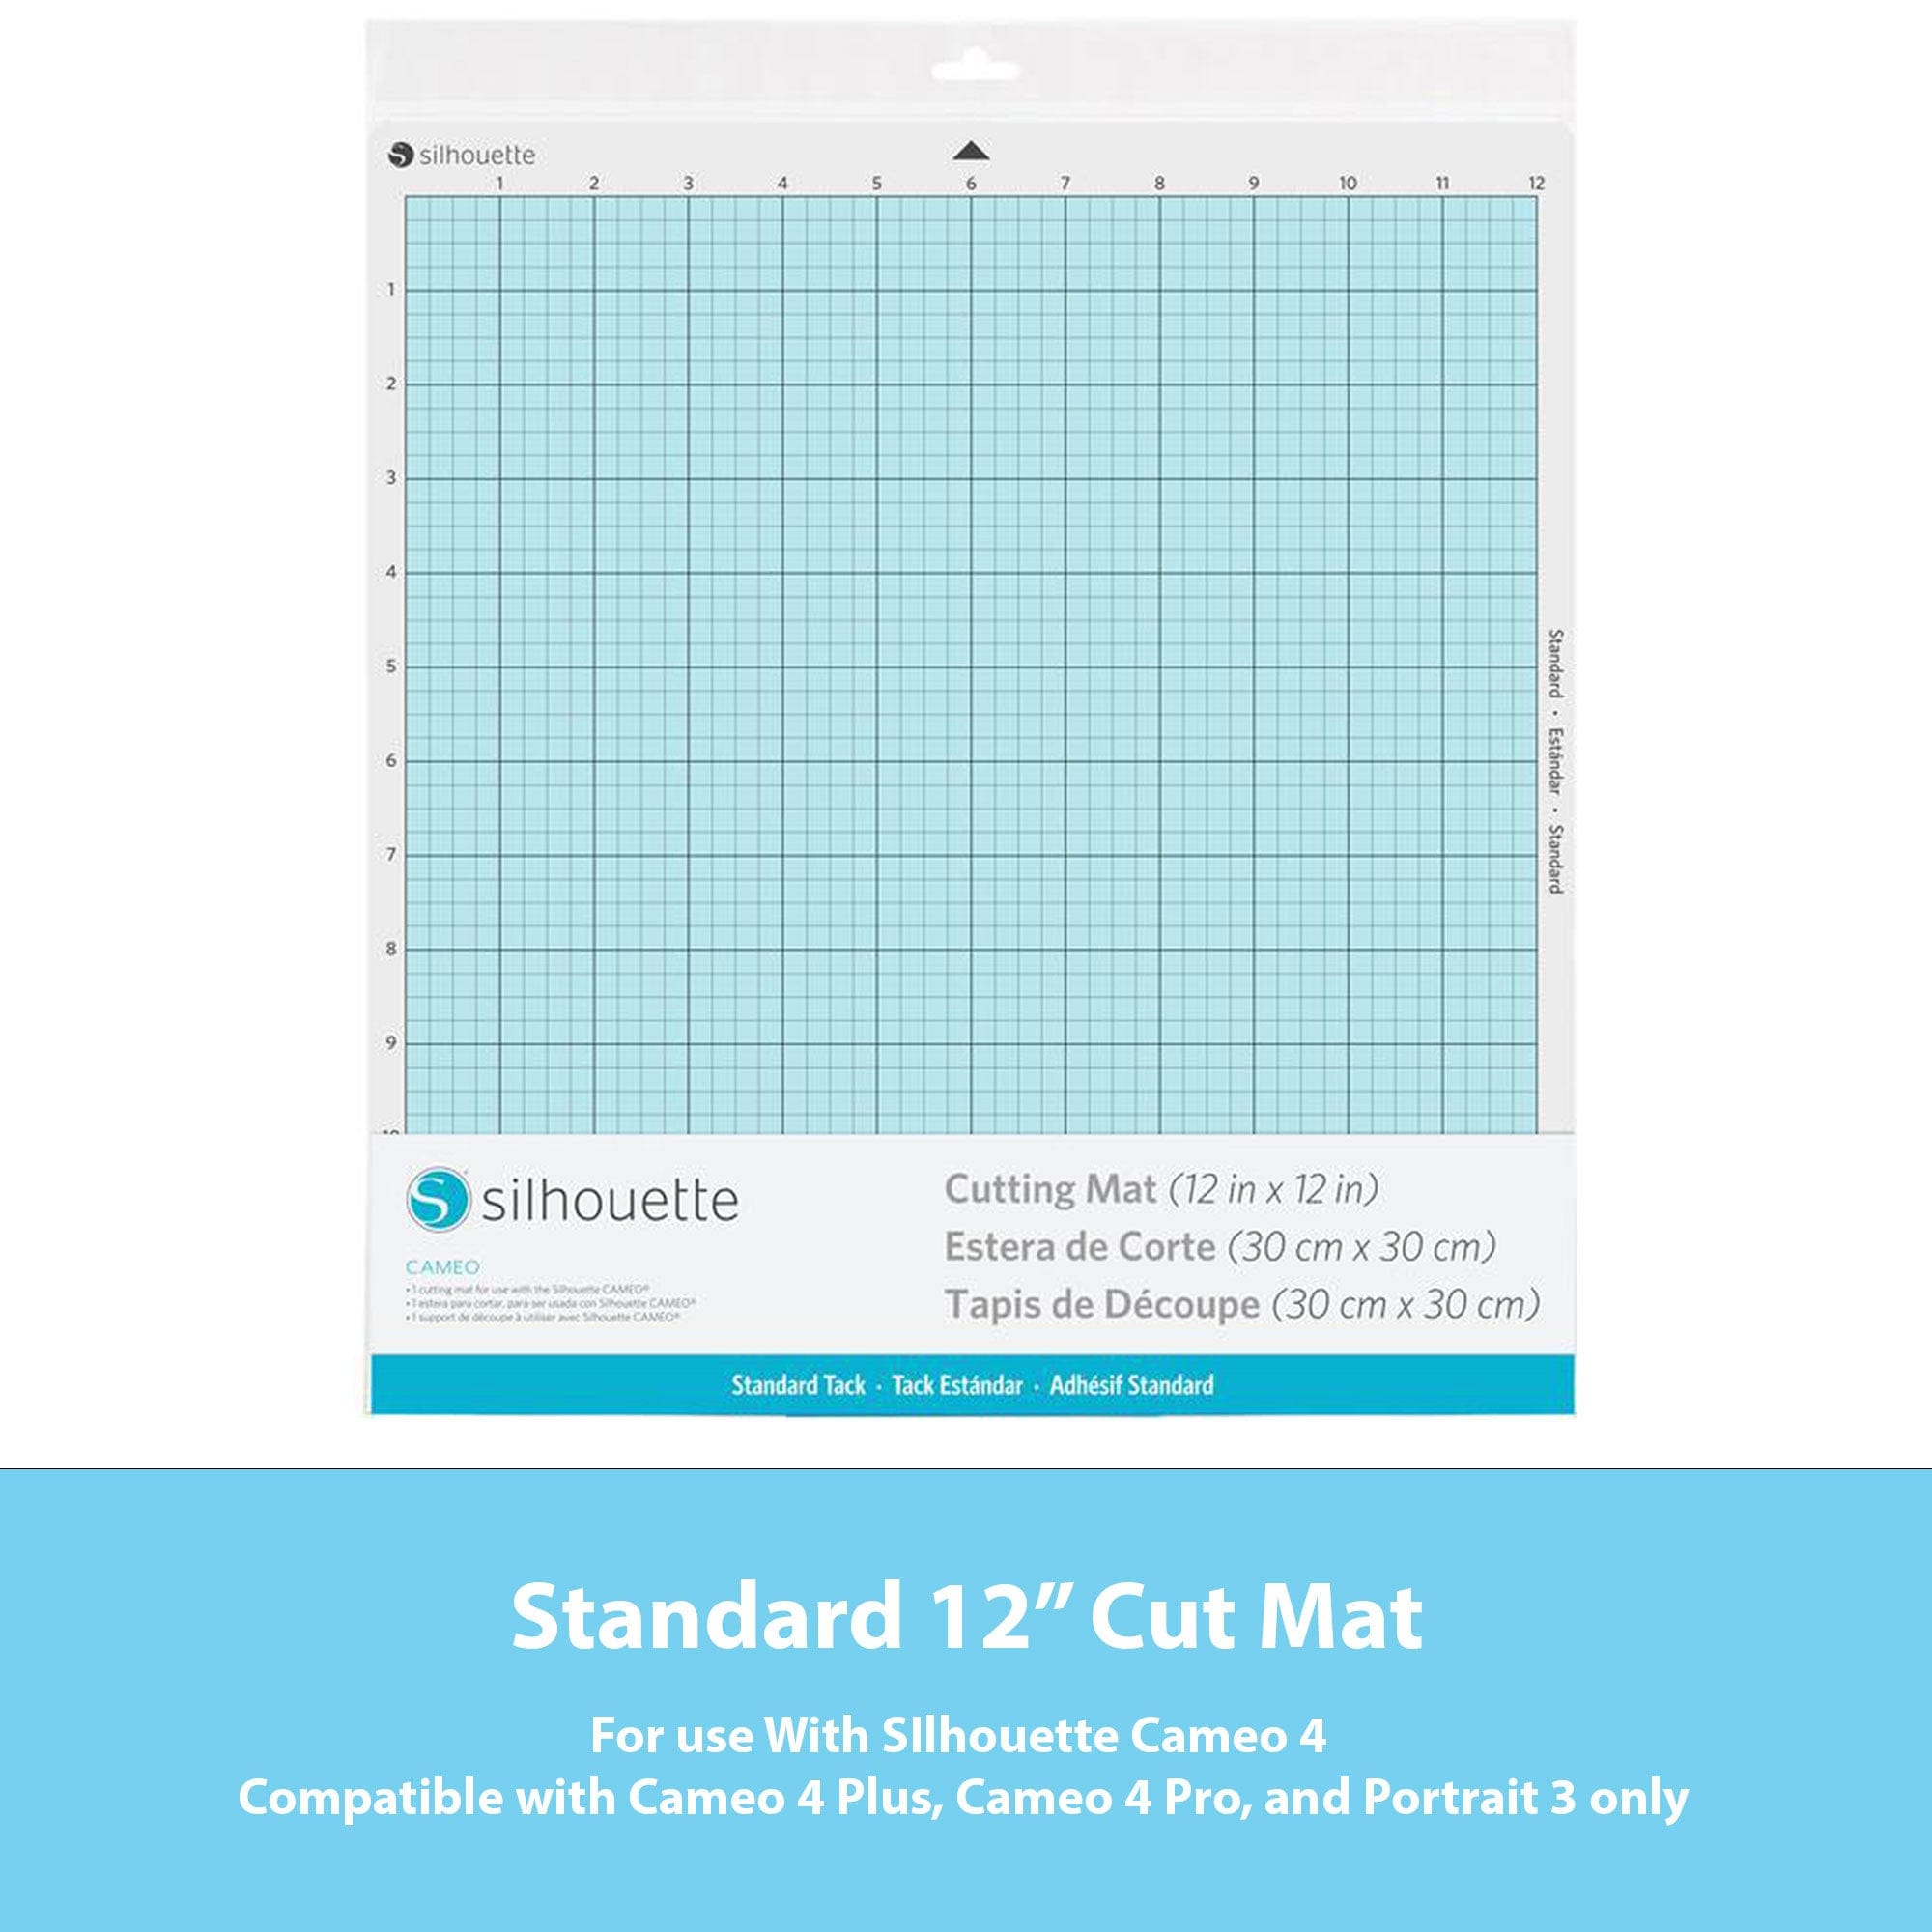 Silhouette America Silhouette Cameo 4 Bundle with 24 Sheets of Oracal 651, 12 Sheets of Siser Easyweed, Oratape, CC Vinyl Tool Kit, Ebooks, Classes, and Bonus Designs